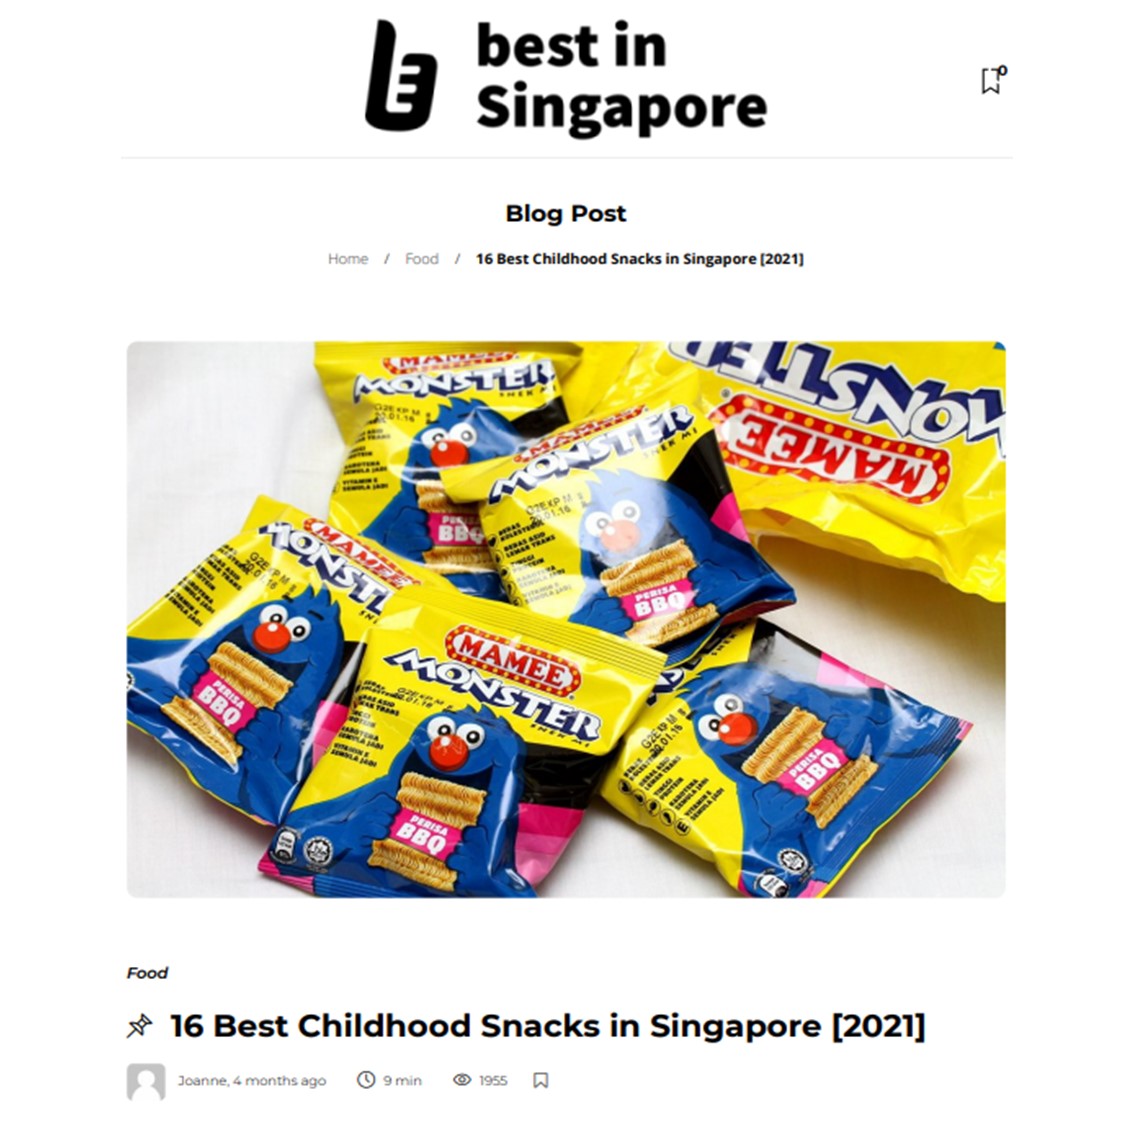 best in Singapore featuring the best childhood snacks